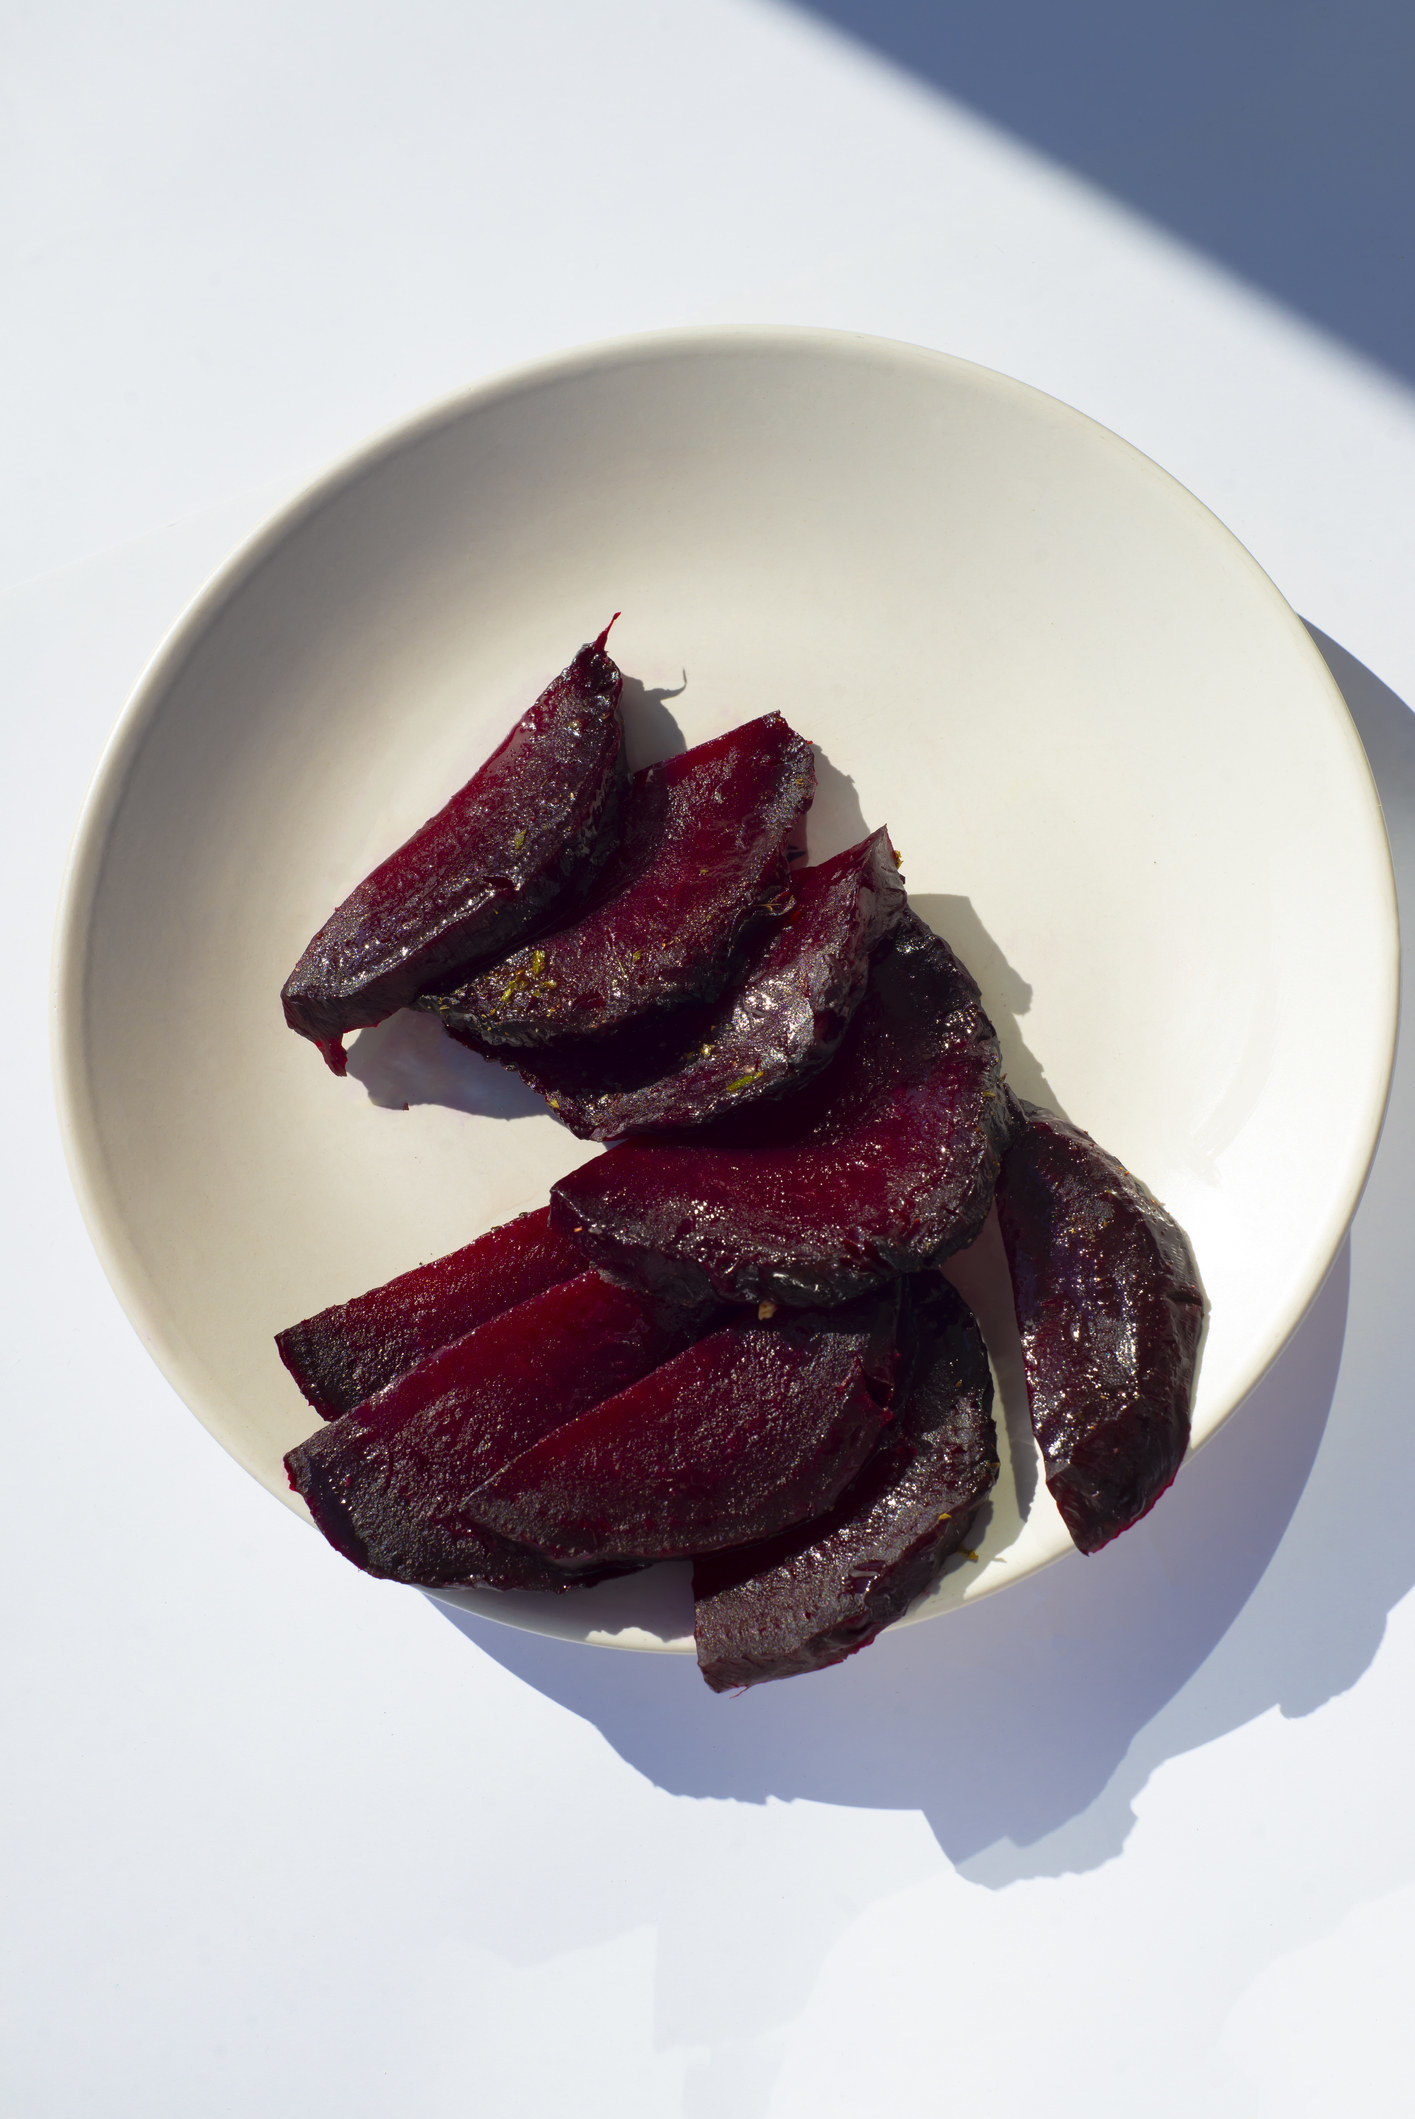 Beet slices on a plate.